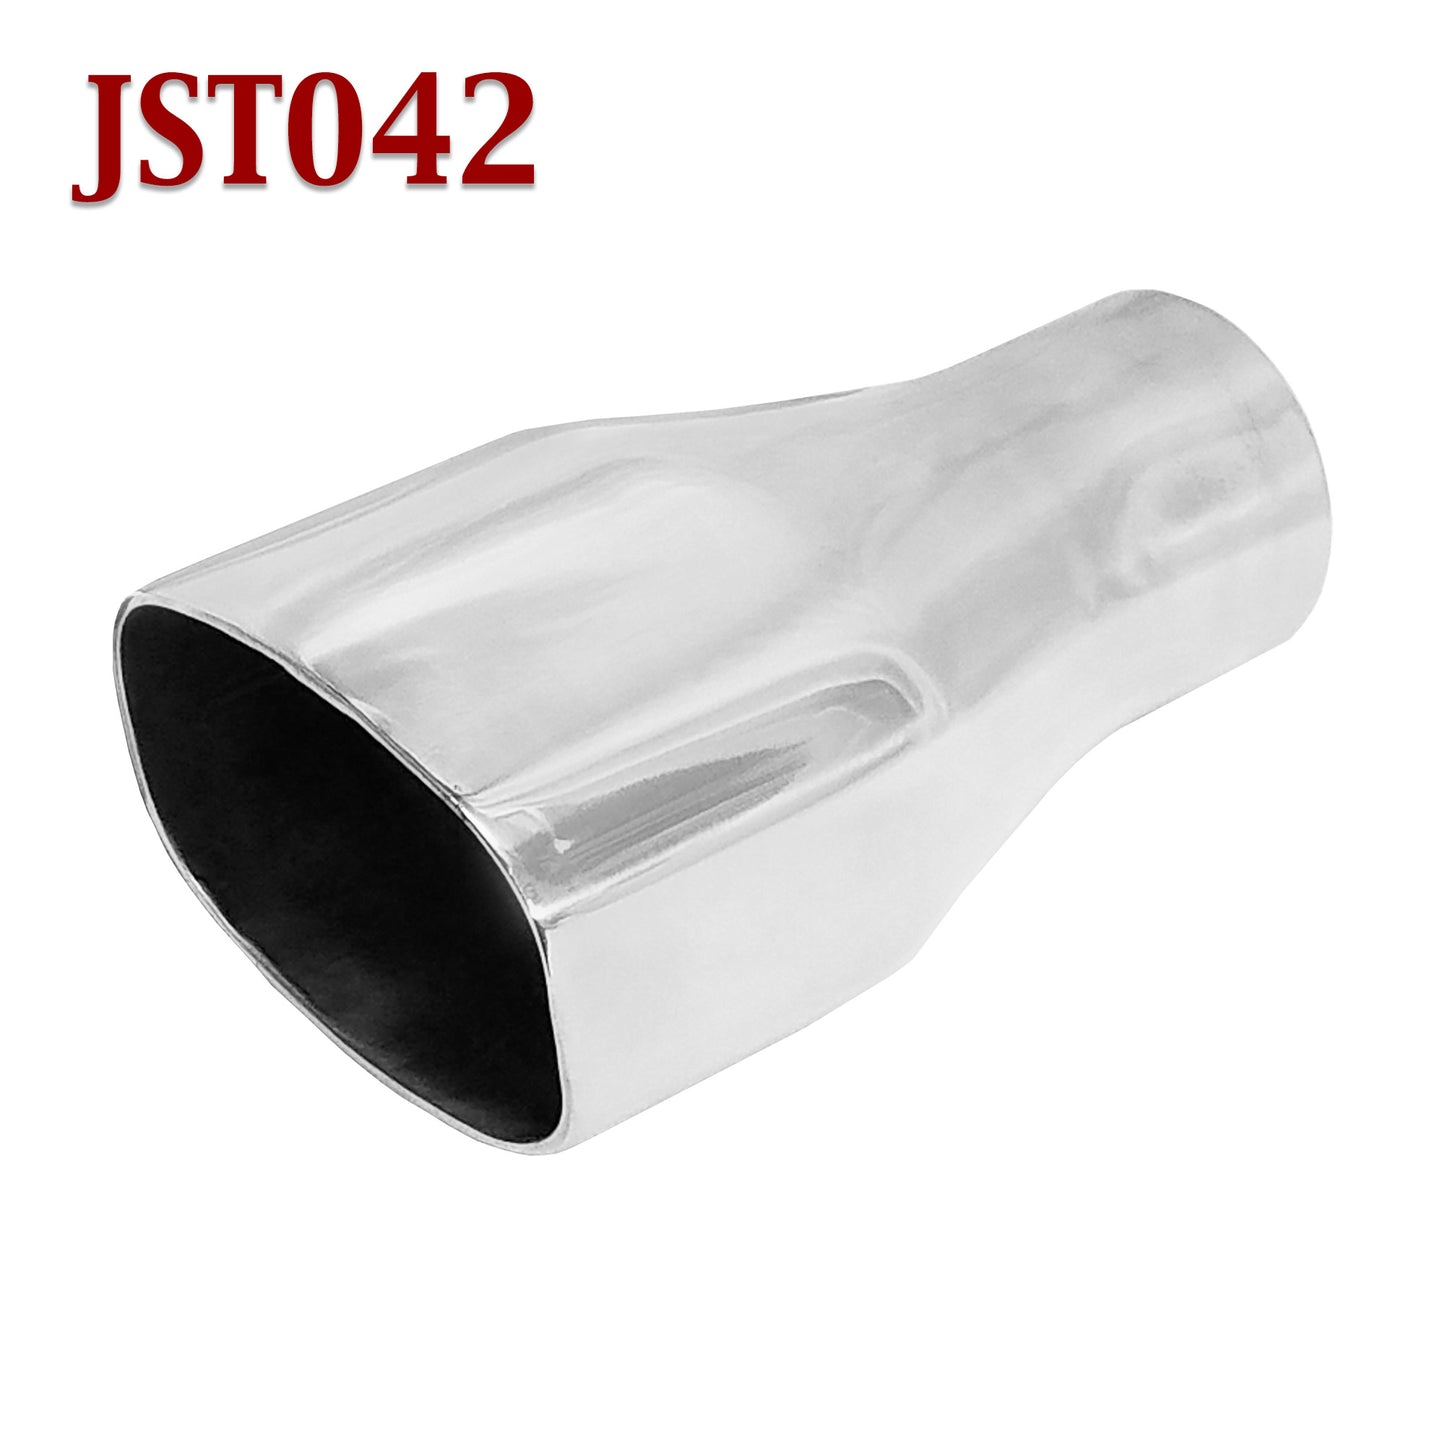 JST042 2.25" Stainless Square Exhaust Tip 2 1/4" Inlet / 3"x4" Outlet / 7" Long